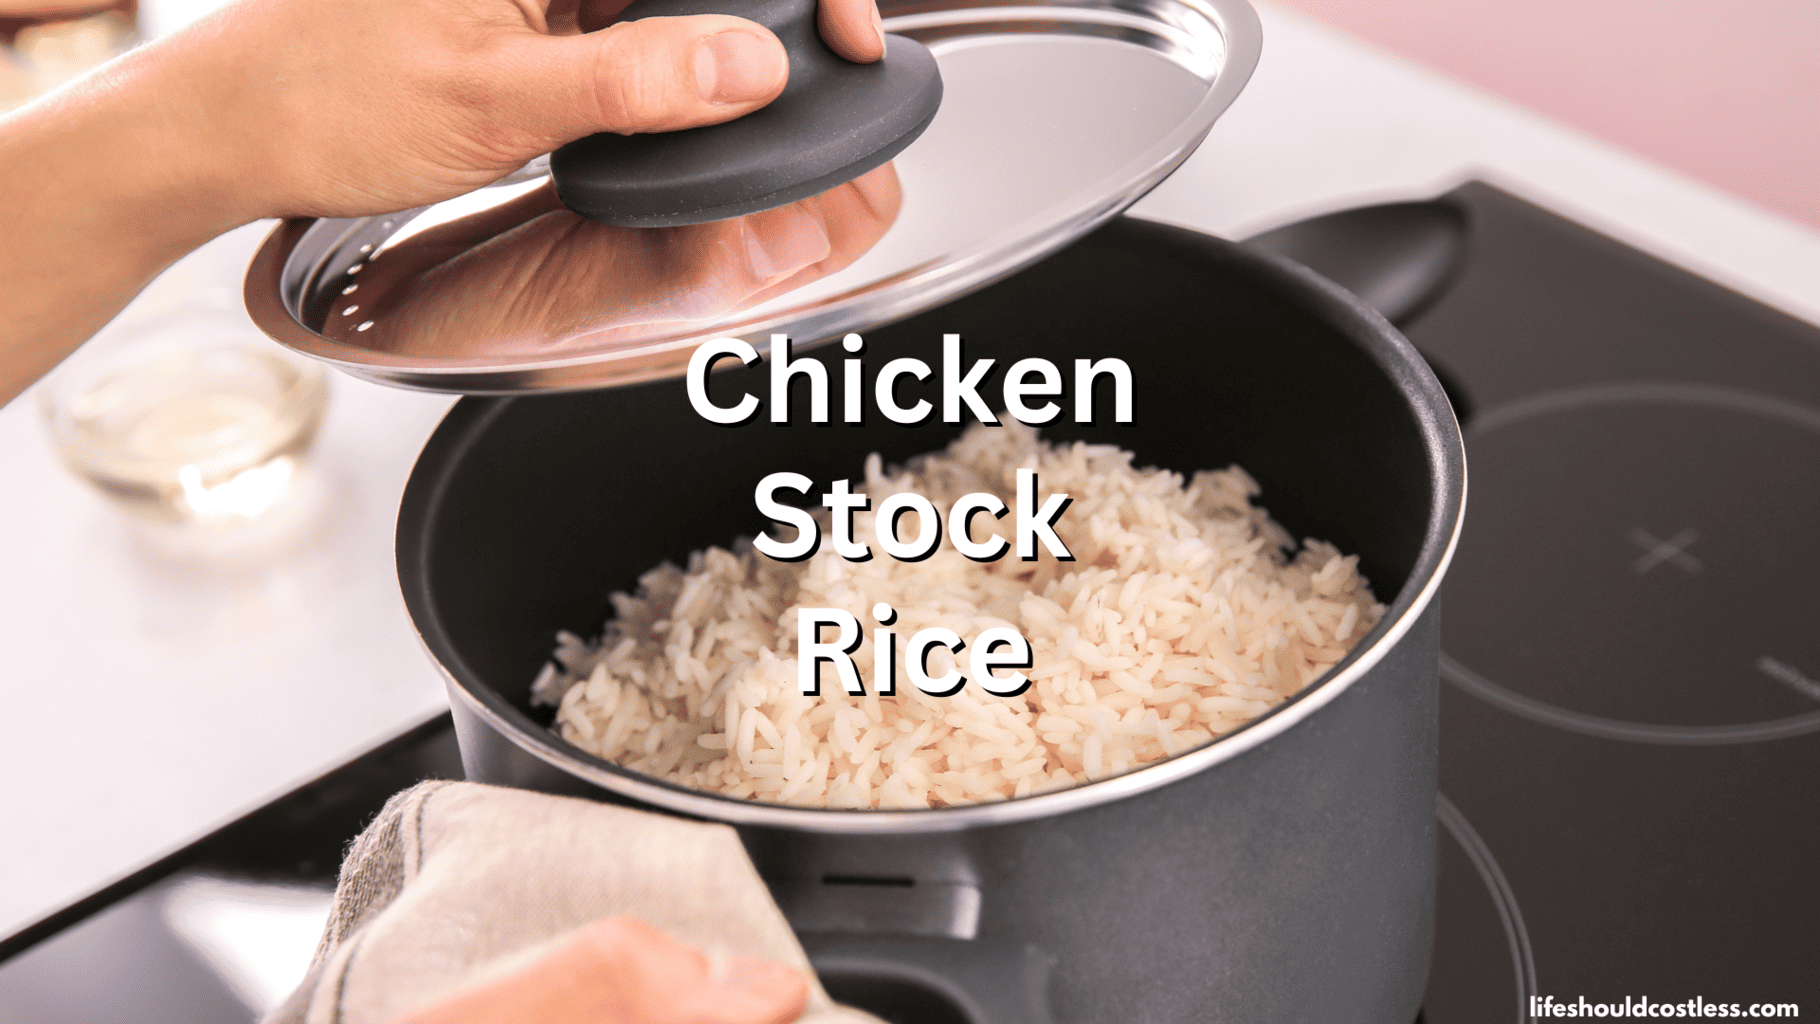 Rice Basket: Enhance Your Rice Cooking With This Basket